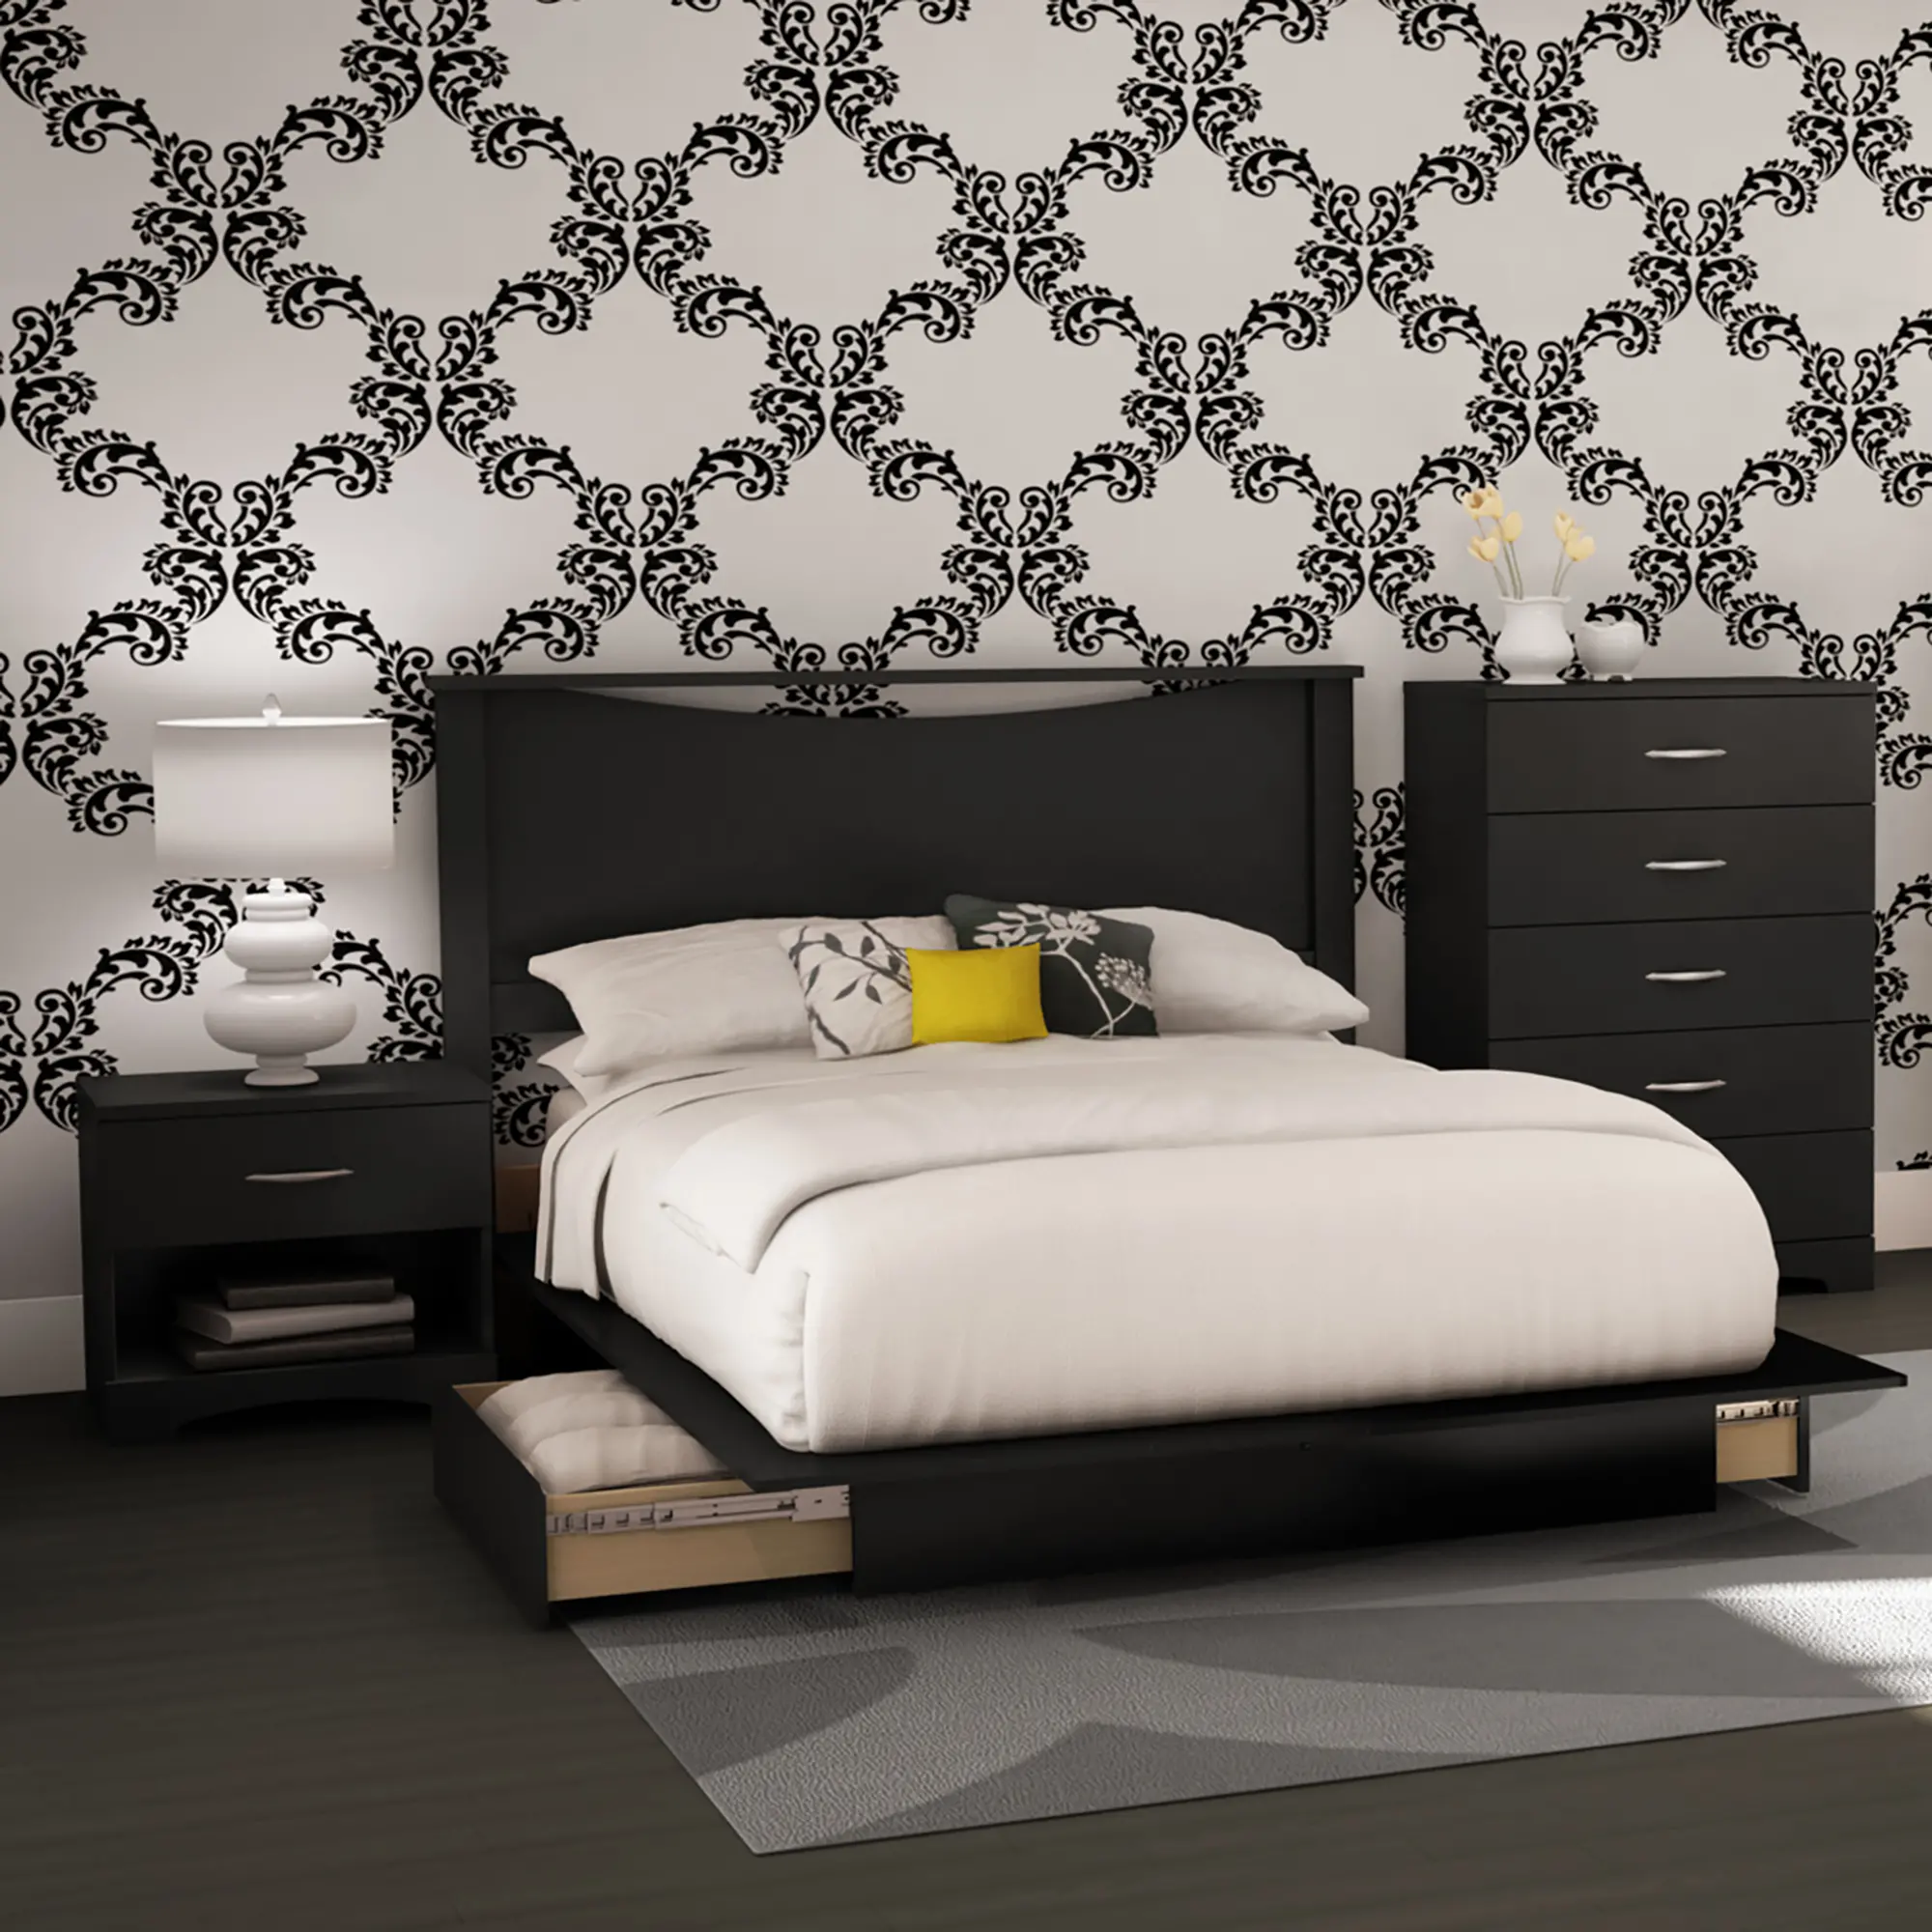 Step One Black 4 Piece Full Size Bedroom Set - South Shore